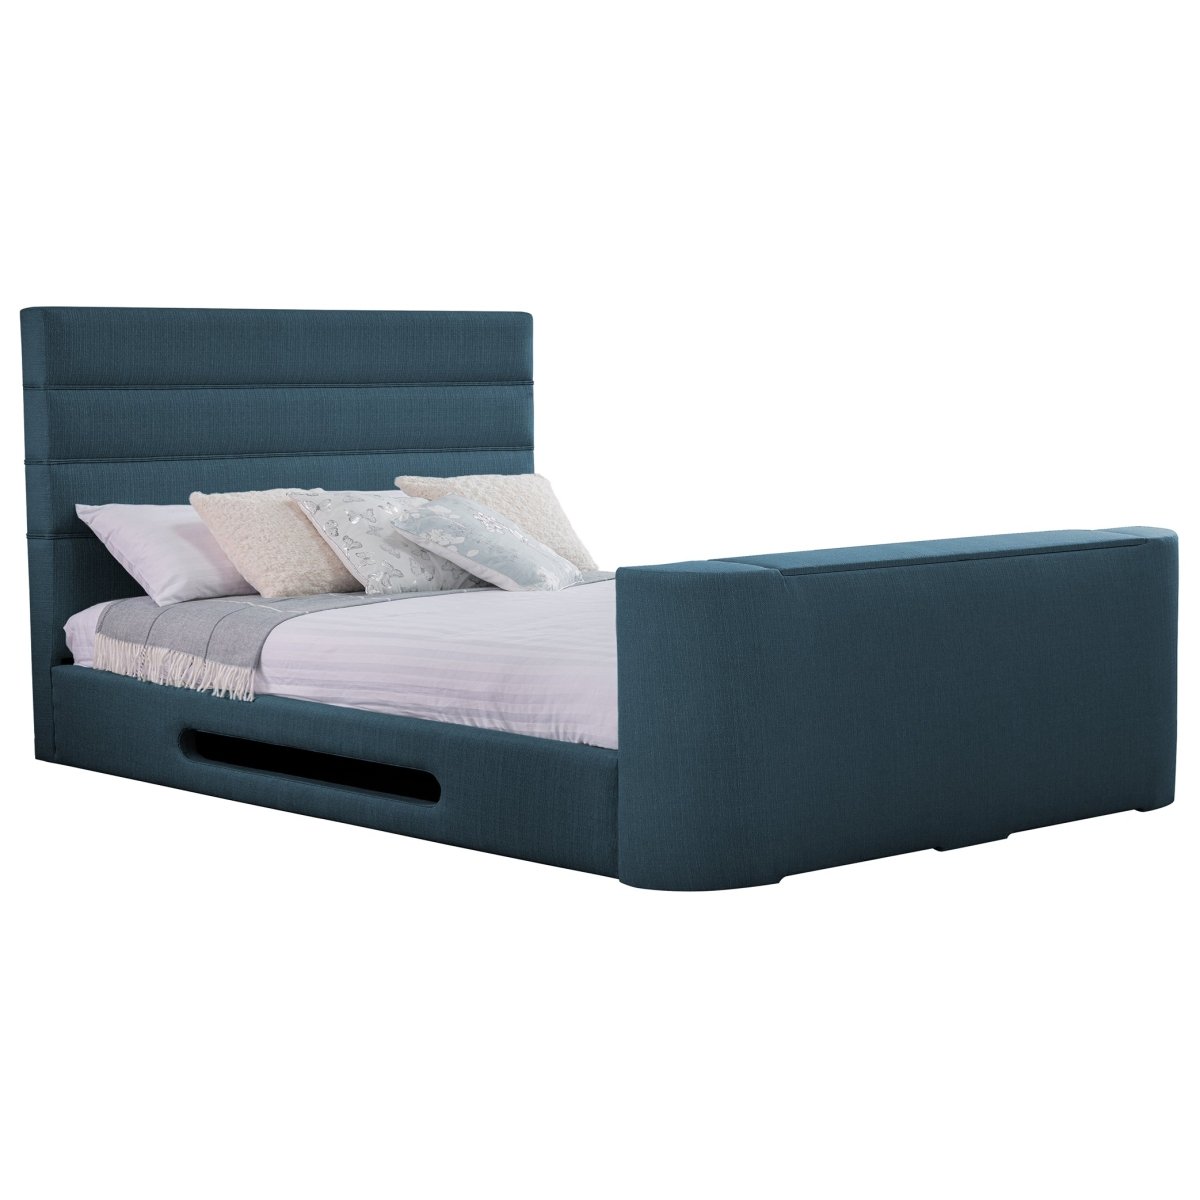 Sweet Dreams Mazarine Standard TV Bed frame - TV Beds Northwest - INMAZ-STD-135-SHER DUCK EGG - choose your colour tvbed - doubletvbed